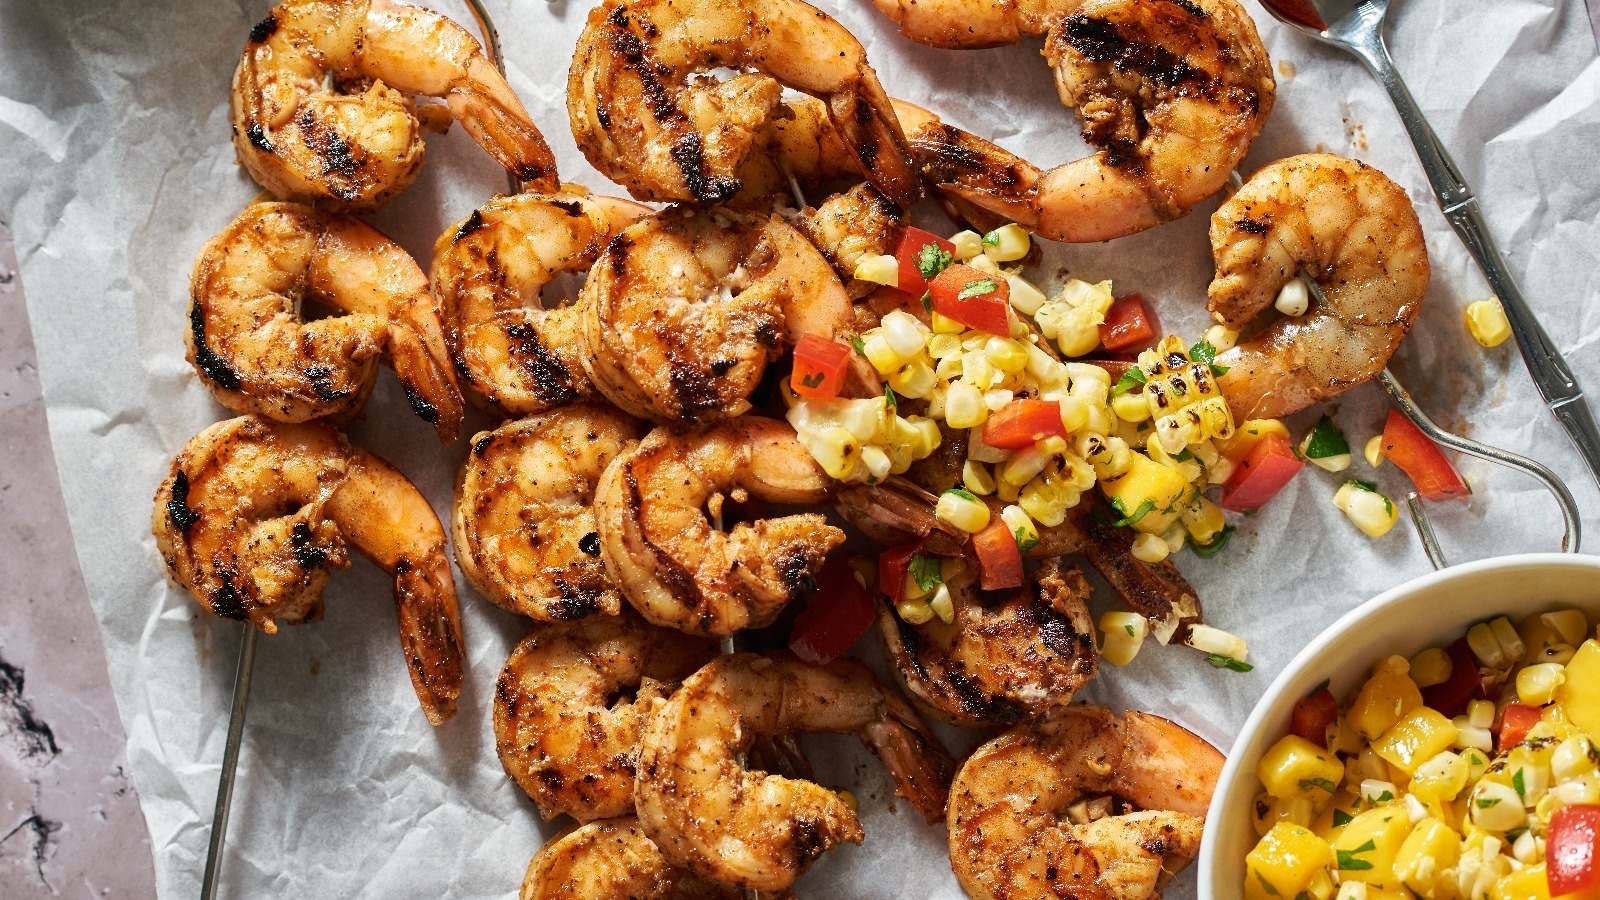 https://www.tastingtable.com/img/gallery/grilled-shrimp-with-charred-corn-and-mango-salsa-recipe/l-intro-1689270879.jpg